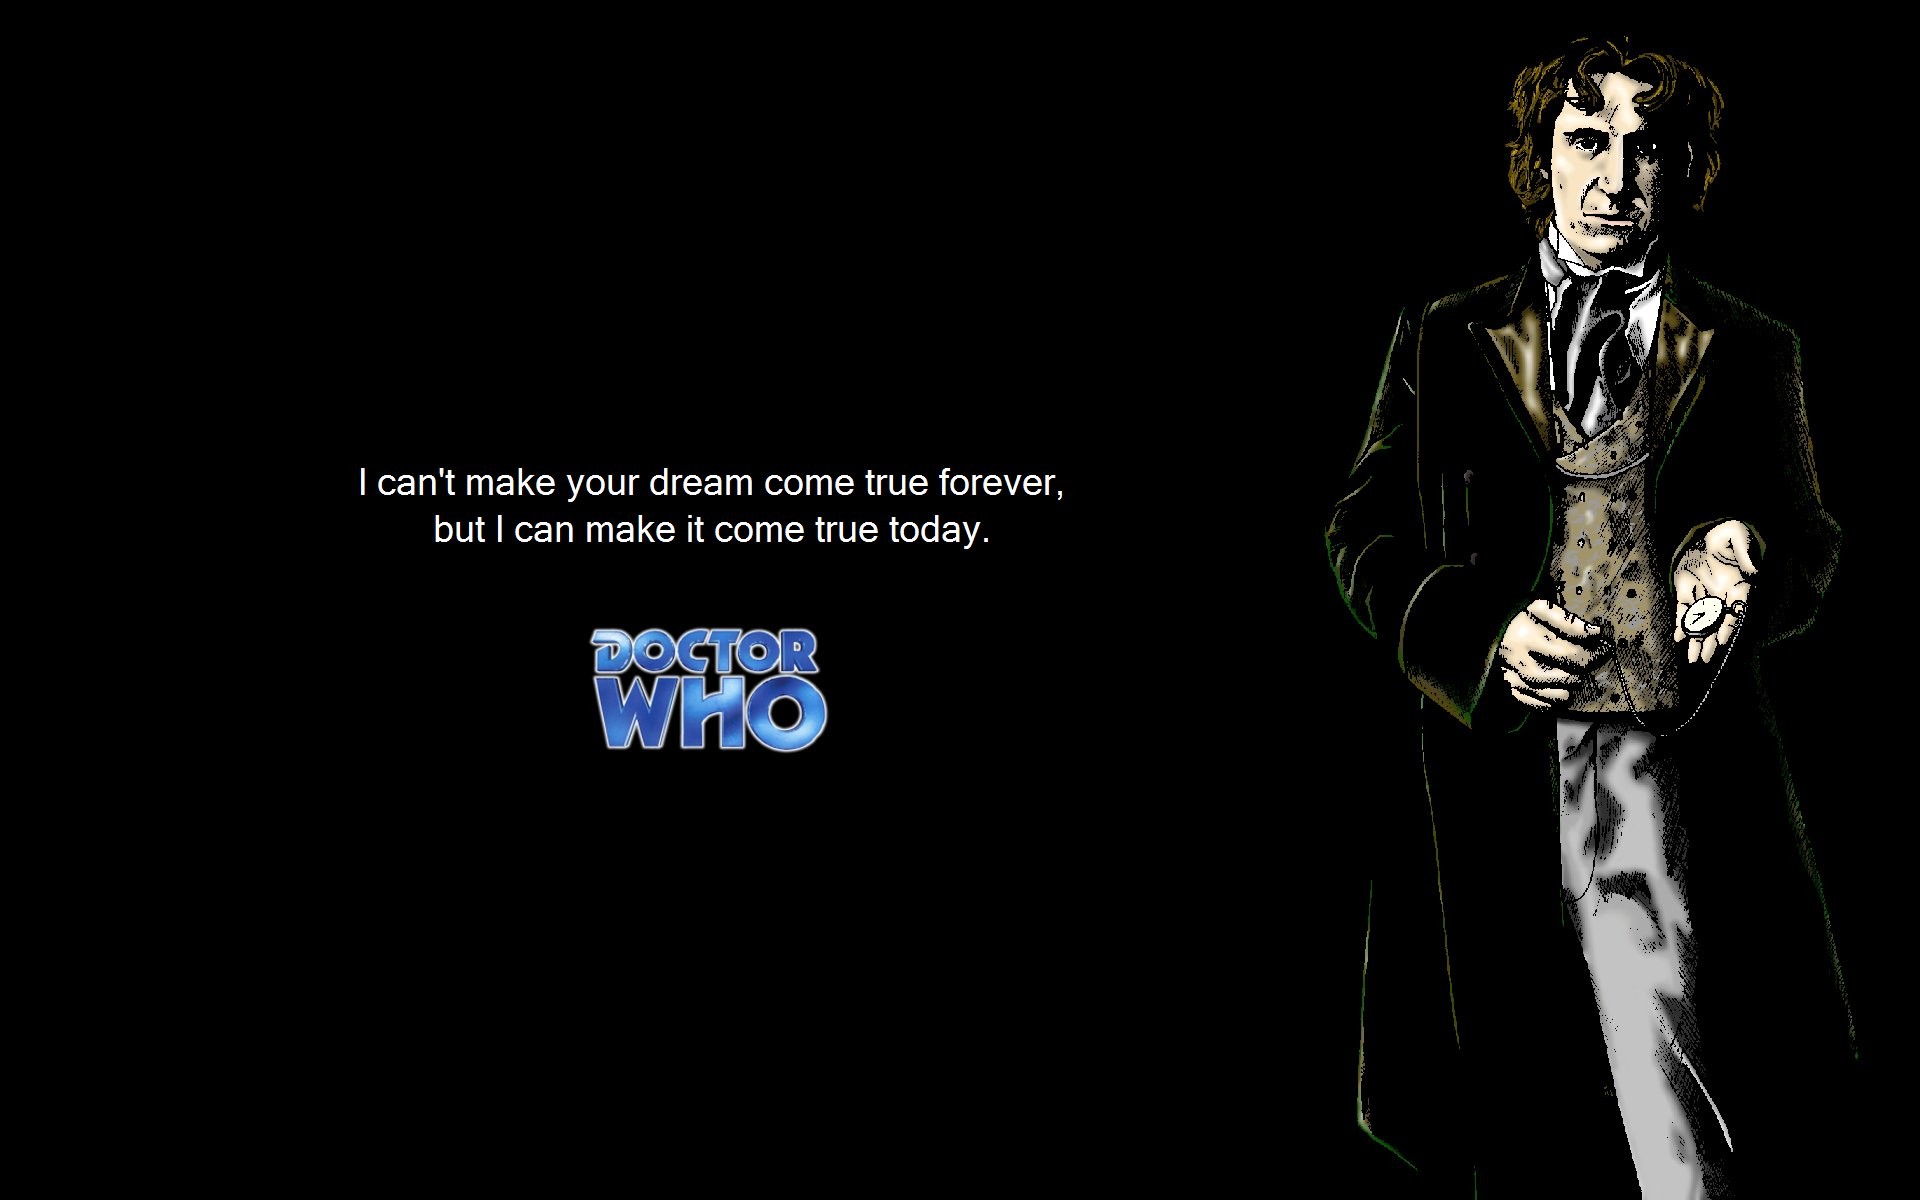 Quotes Paul McGann Doctor Who Eighth Doctor wallpaper | | 300278  | WallpaperUP